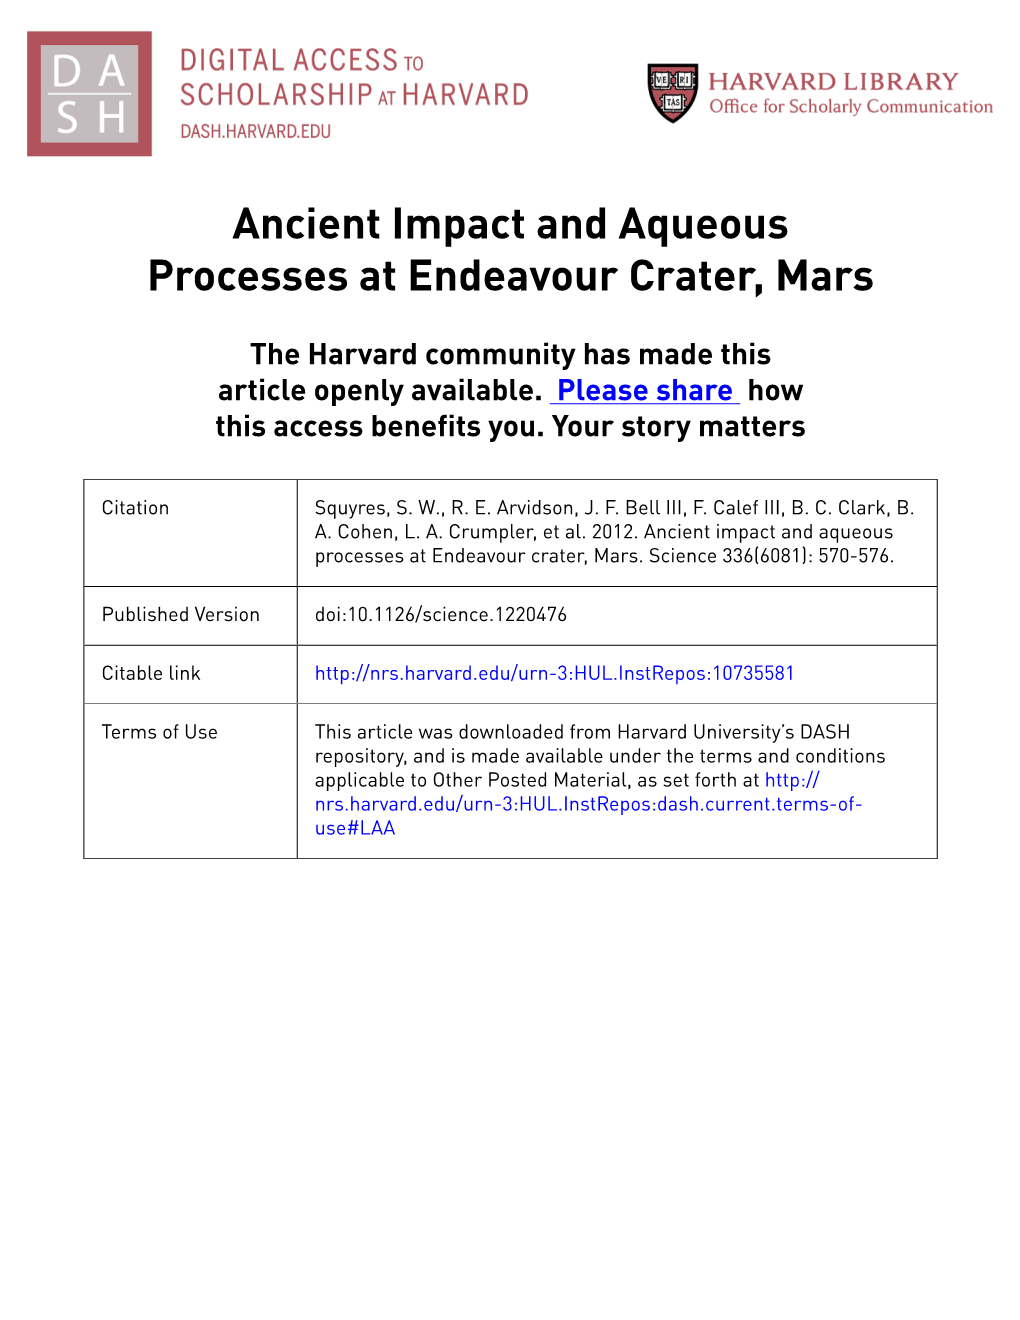 Ancient Impact and Aqueous Processes at Endeavour Crater, Mars